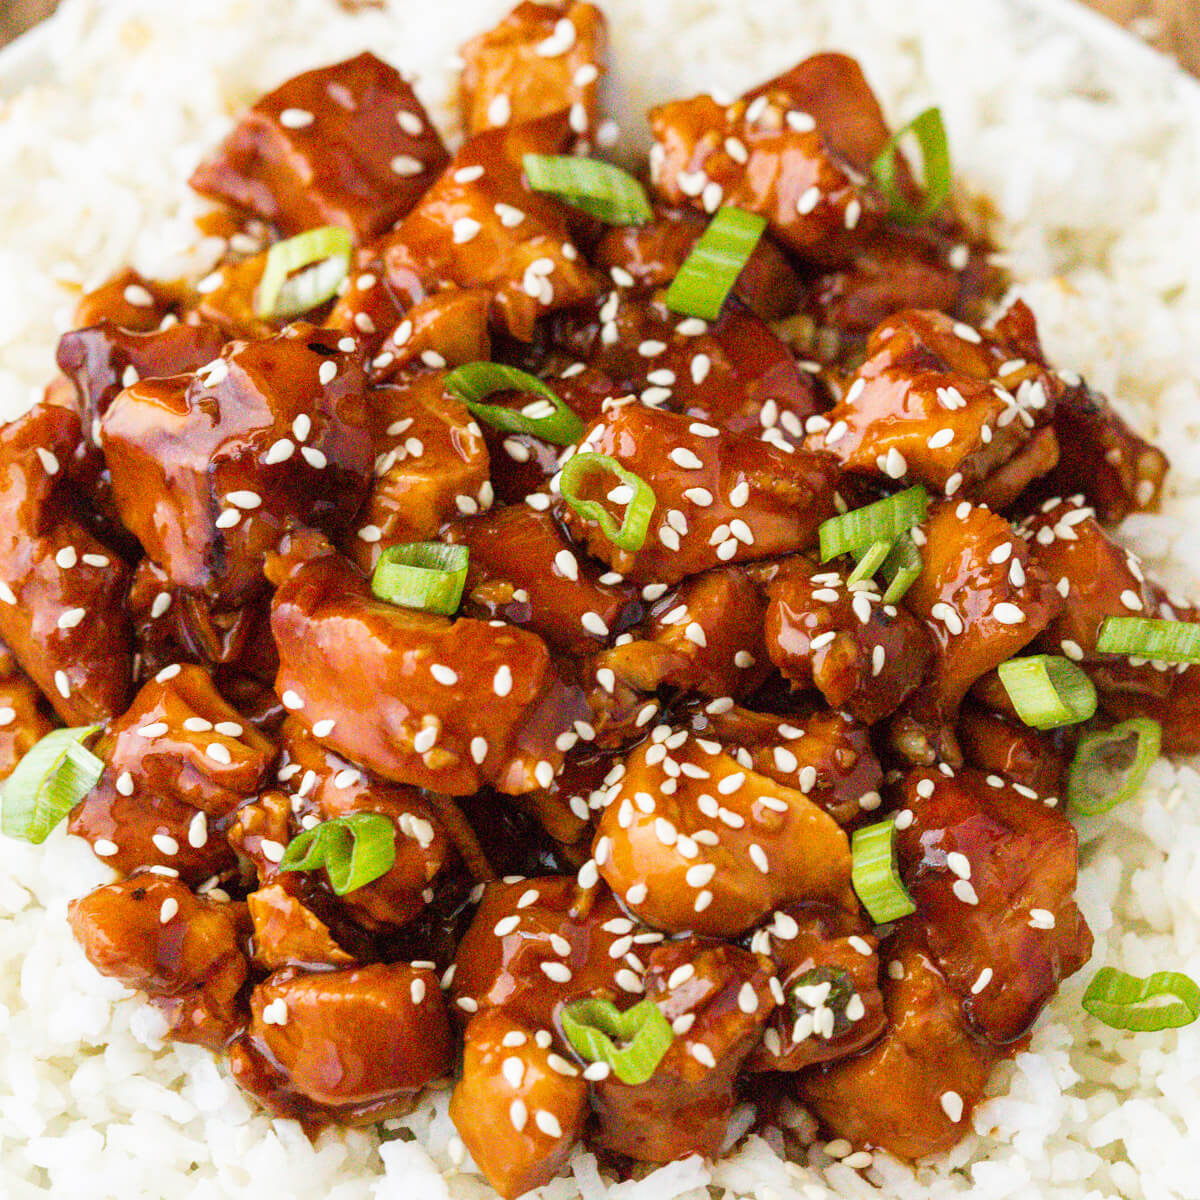 Our 10 Most Popular Slow Cooker Recipes This Year  Slow cooker recipes,  Cooker recipes, Orange chicken recipe slow cooker